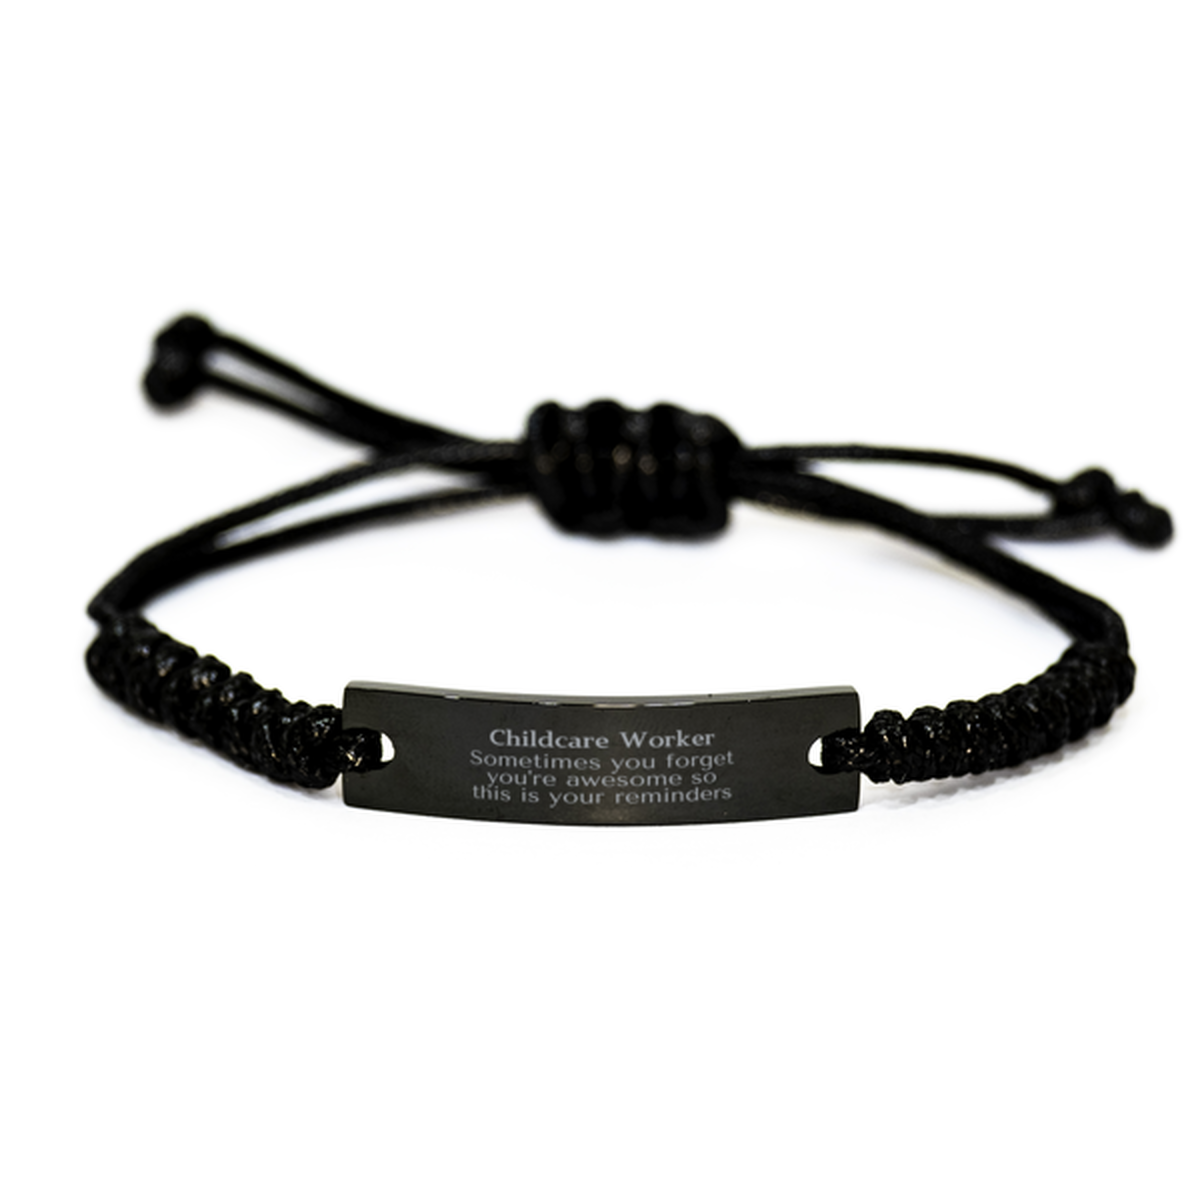 Sentimental Childcare Worker Black Rope Bracelet, Childcare Worker Sometimes you forget you're awesome so this is your reminders, Graduation Christmas Birthday Gifts for Childcare Worker, Men, Women, Coworkers